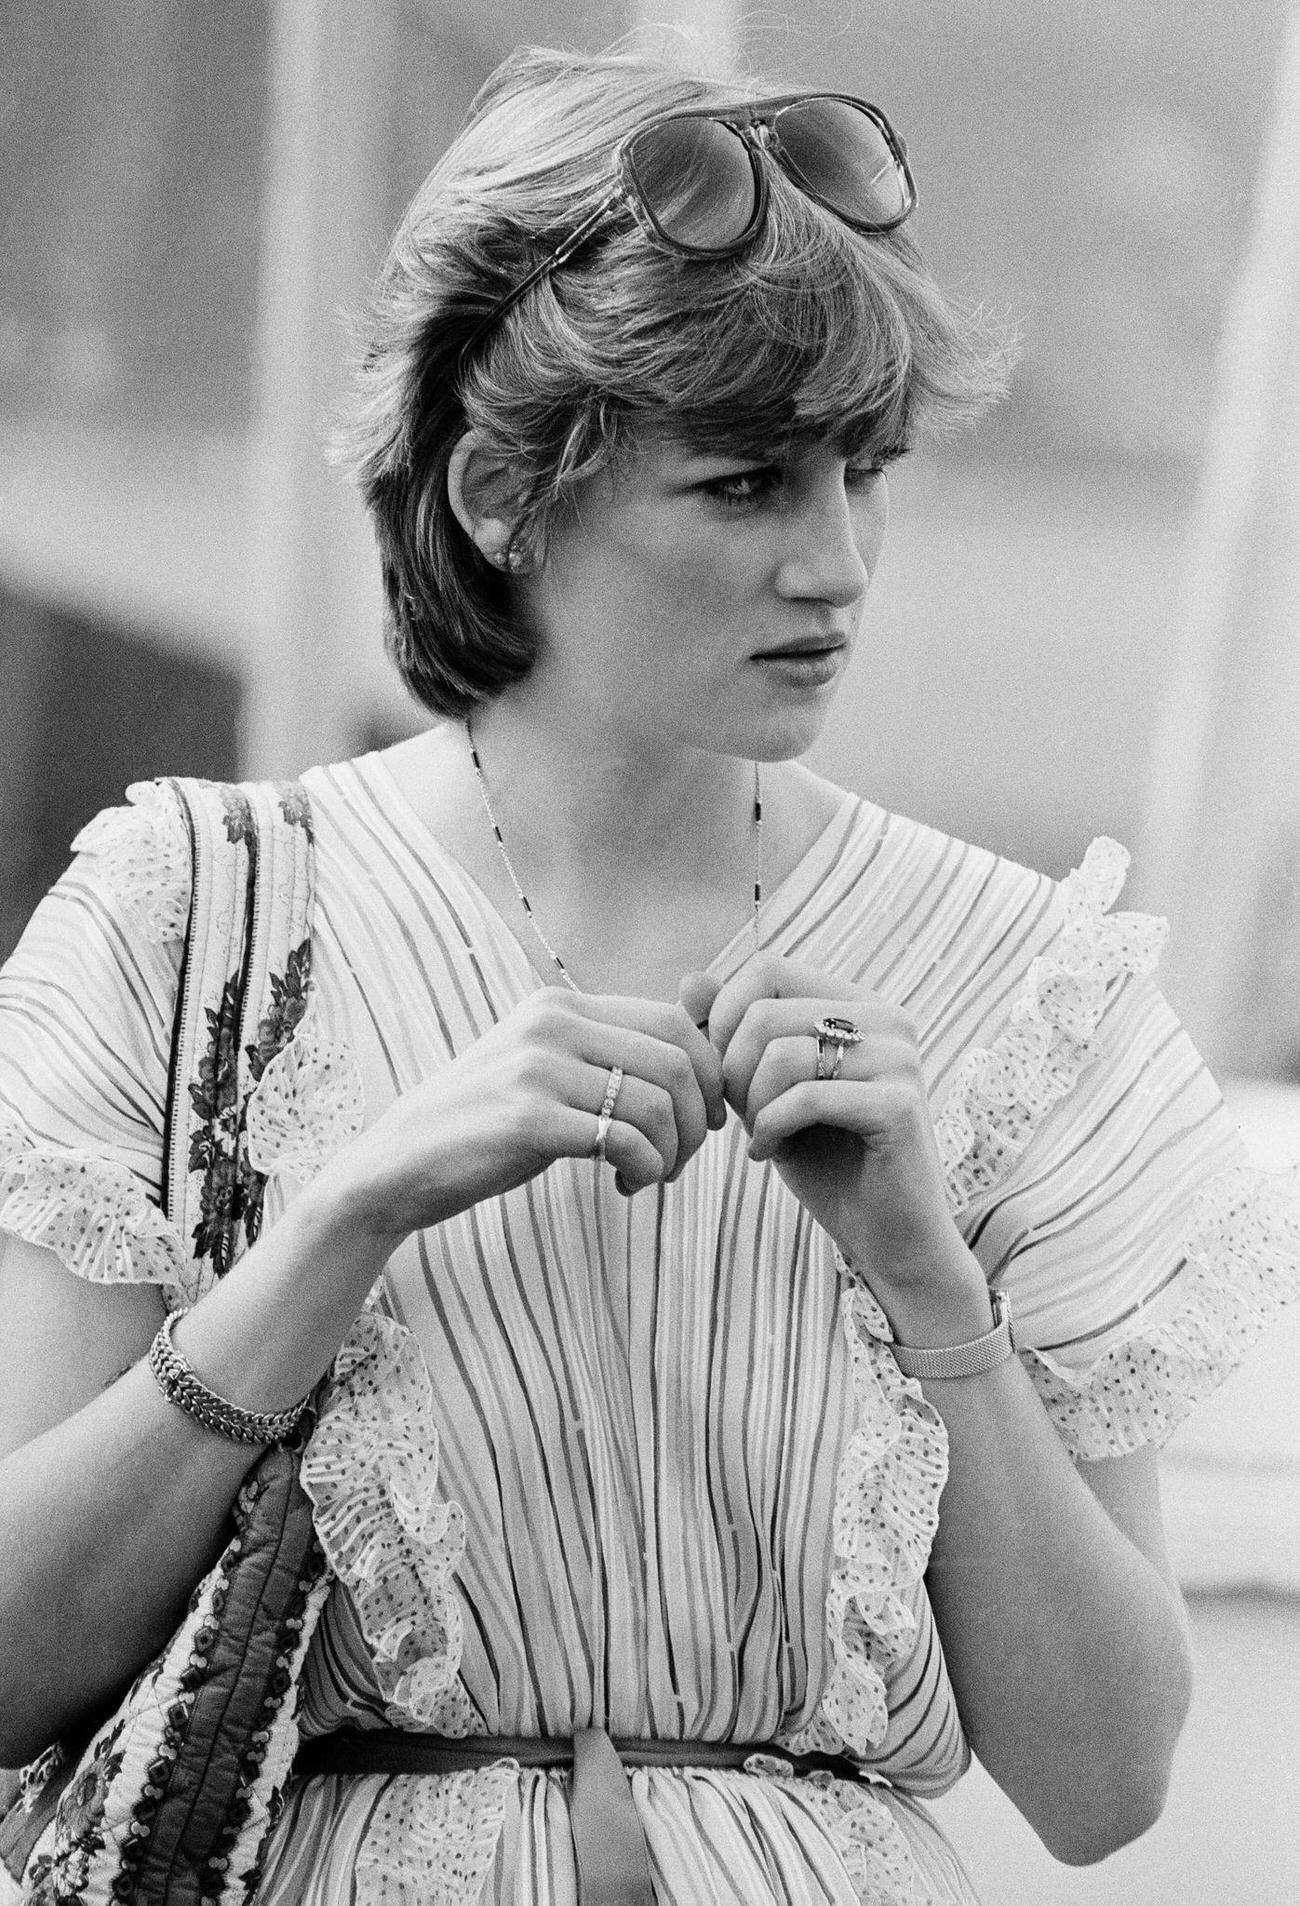 Lady Diana Spencer watching Prince Charles play polo, 1981